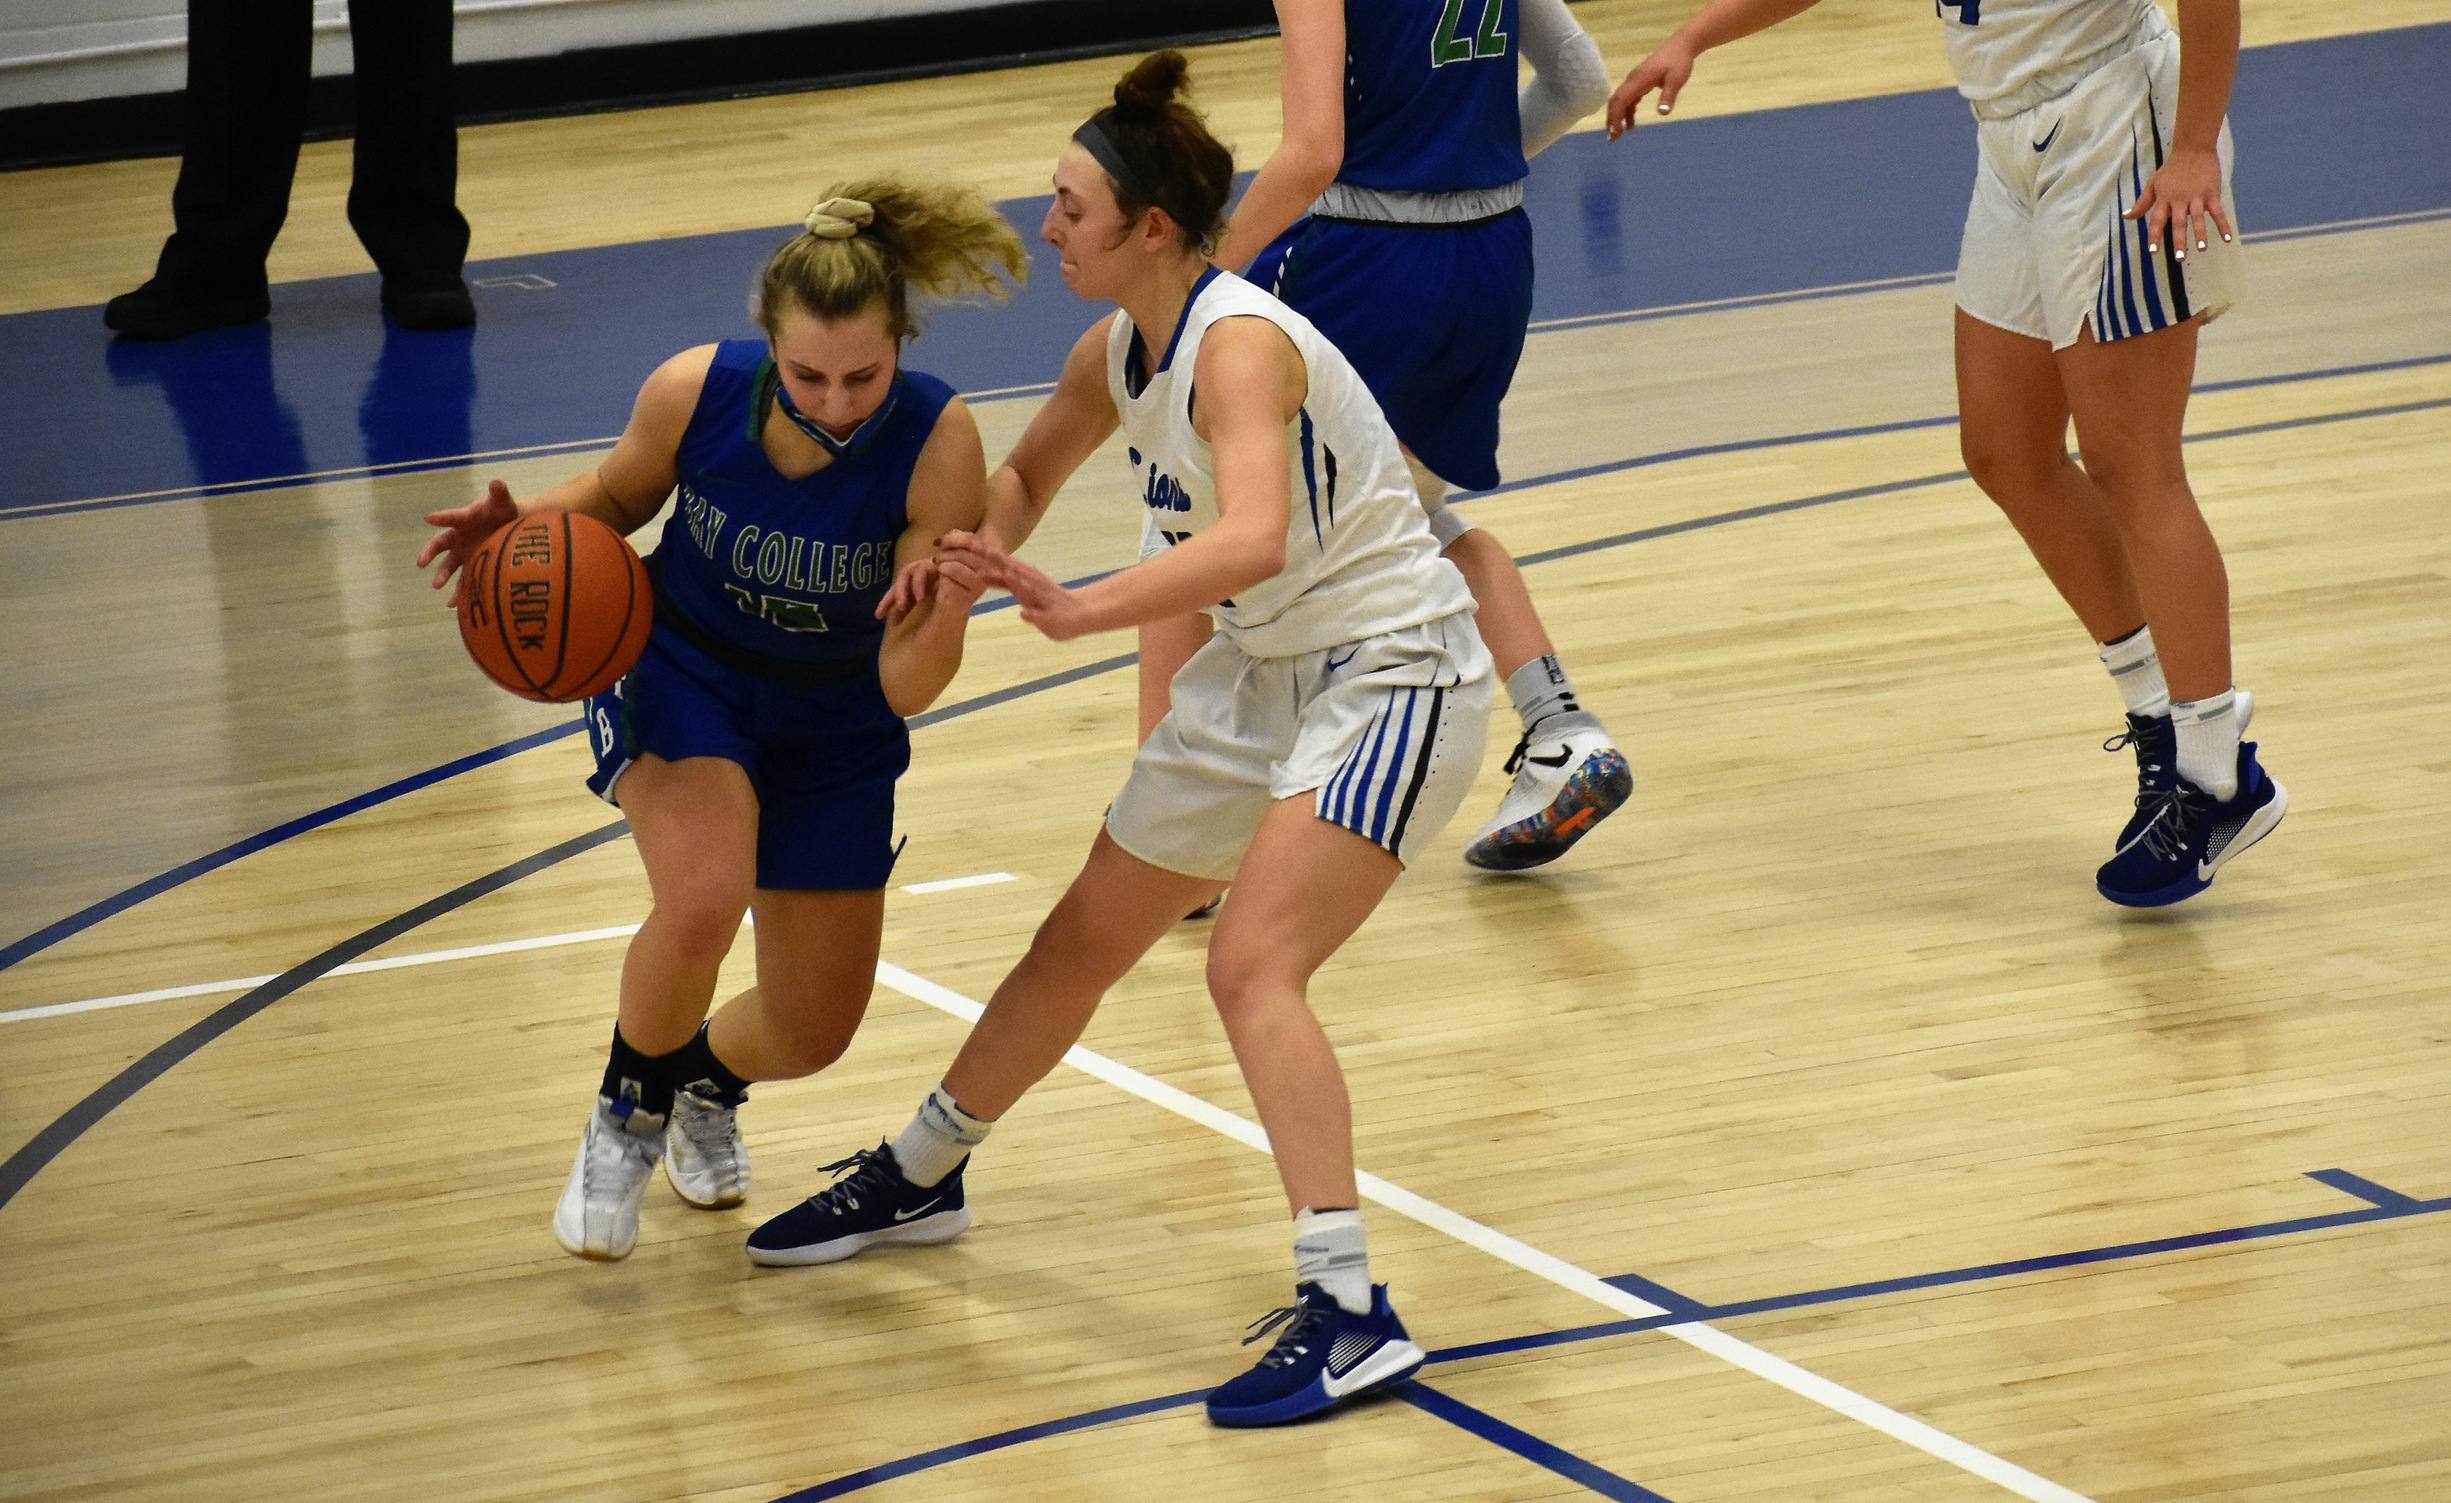 Holly Wardynski tries to dribble to her right with a defender closely guarding her.